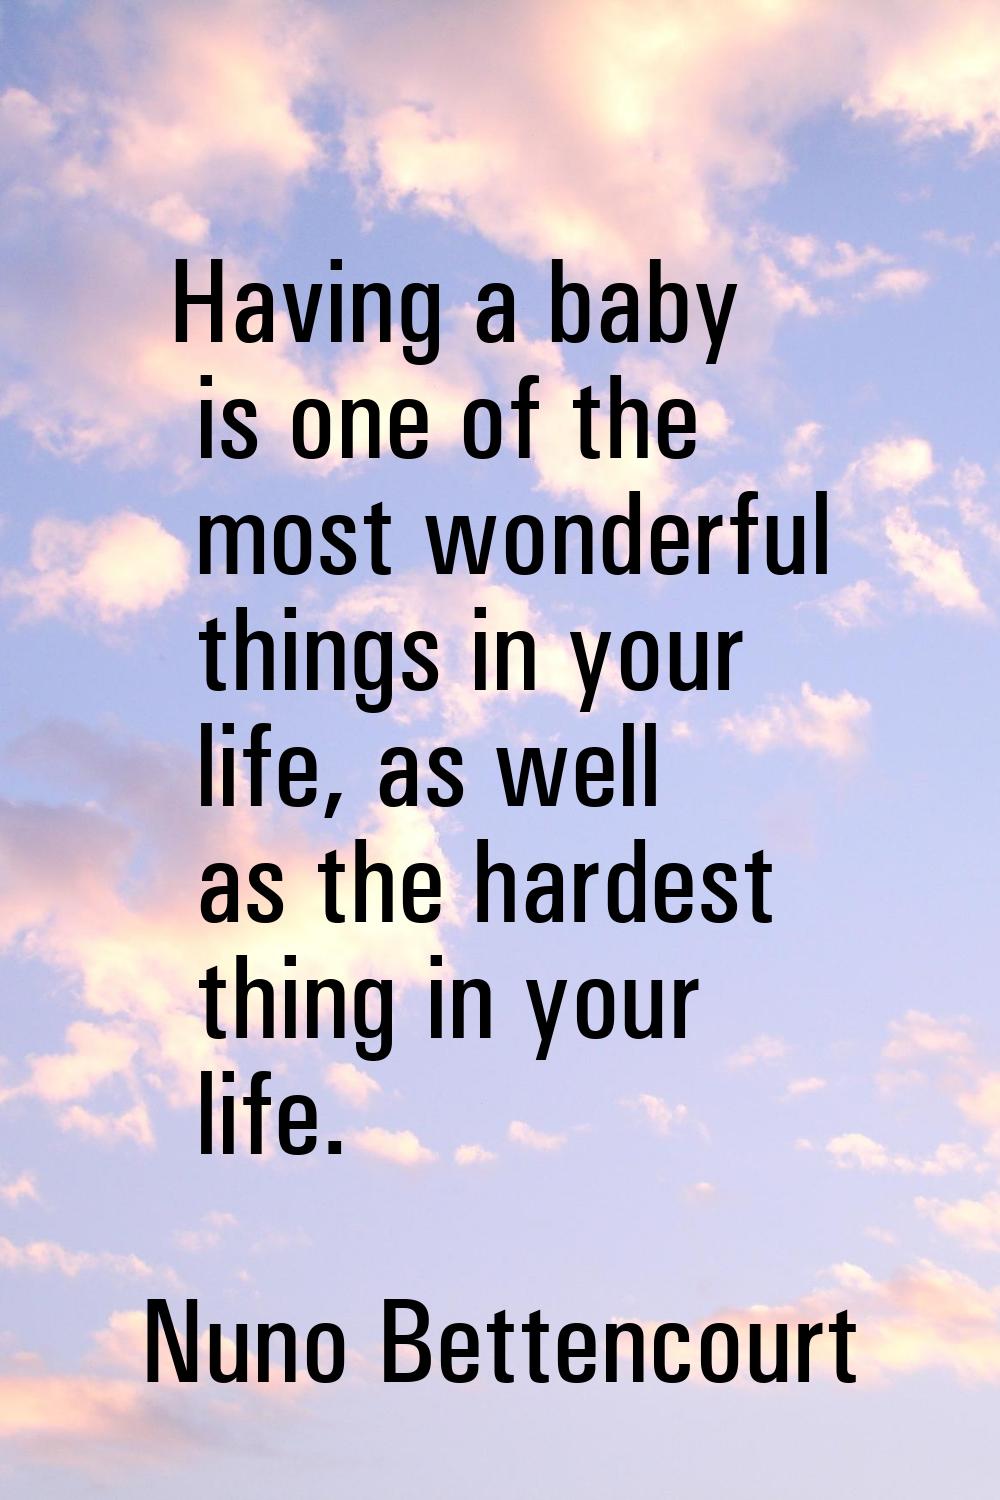 Having a baby is one of the most wonderful things in your life, as well as the hardest thing in you